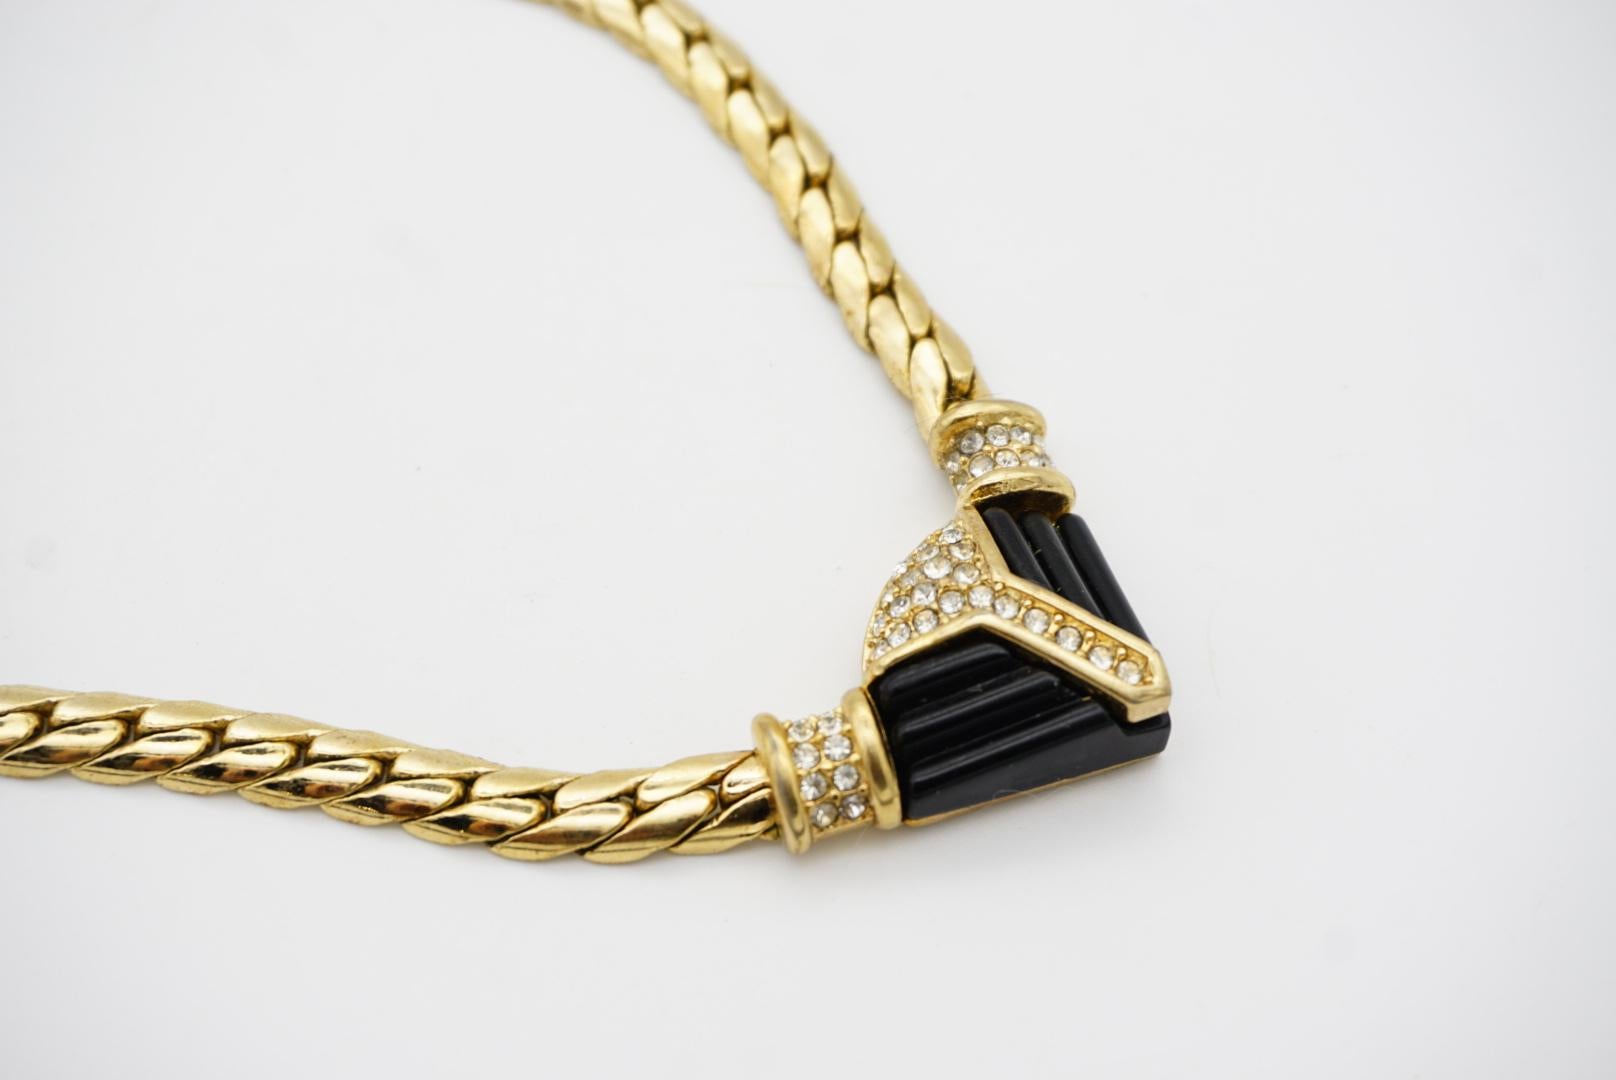 Christian Dior Vintage 1970s Crystals Black Triangle Chunky Pendant Necklace For Sale 5